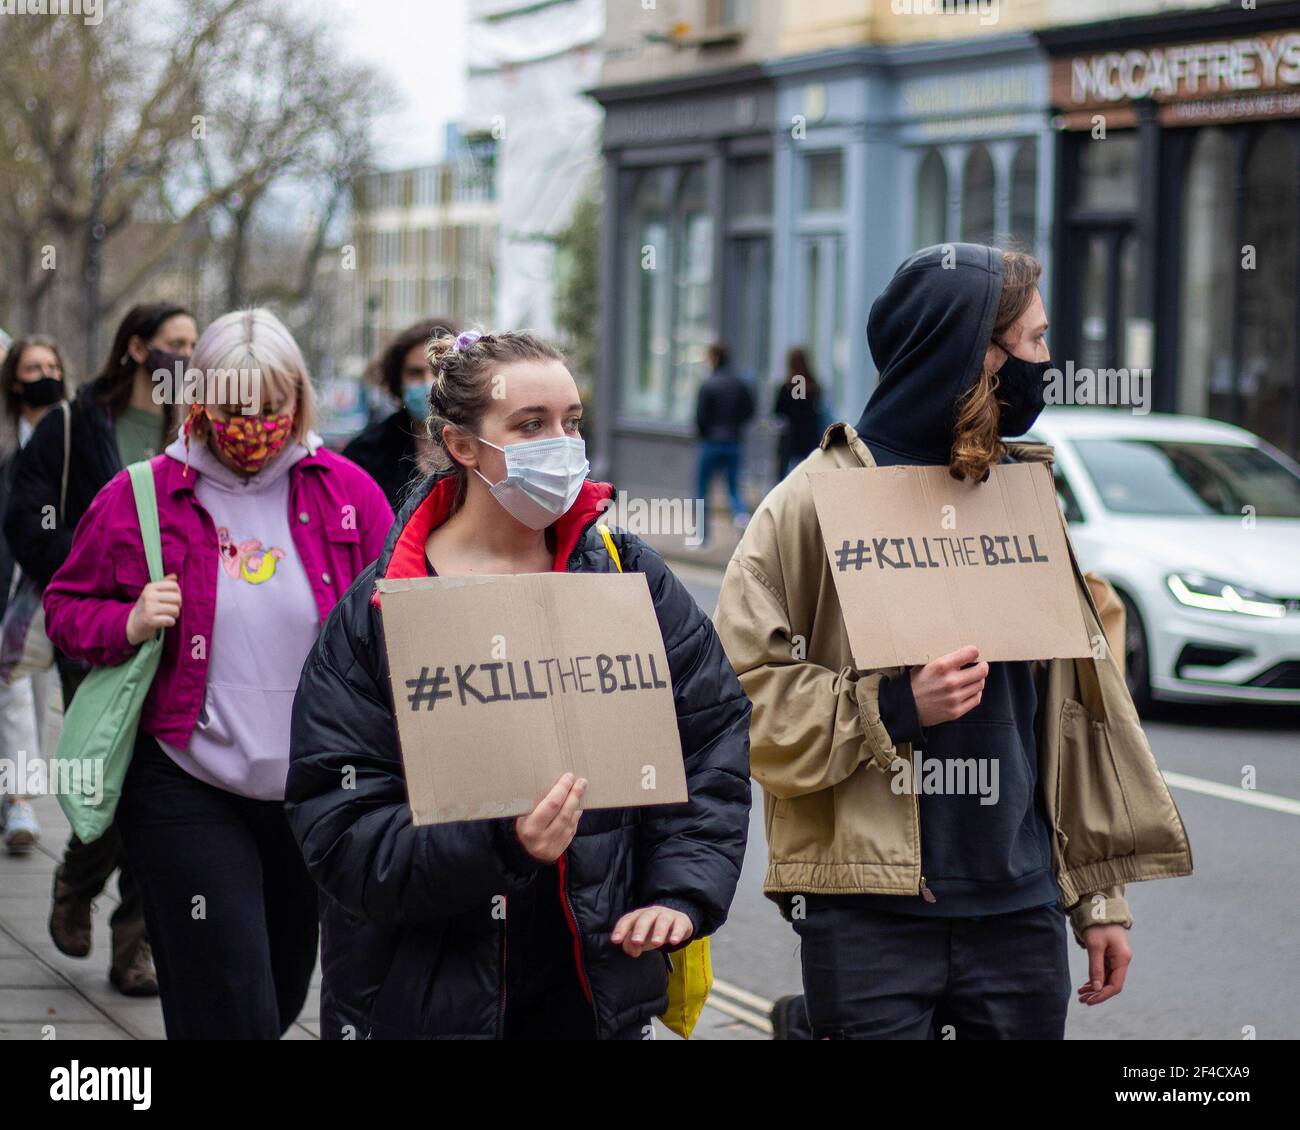 People marching through the High Streets in Cheltenham holding a sign '#KILLTHEBILL' to protest the introduction of the restriction to the right of protest. 20/02/2021 Stock Photo